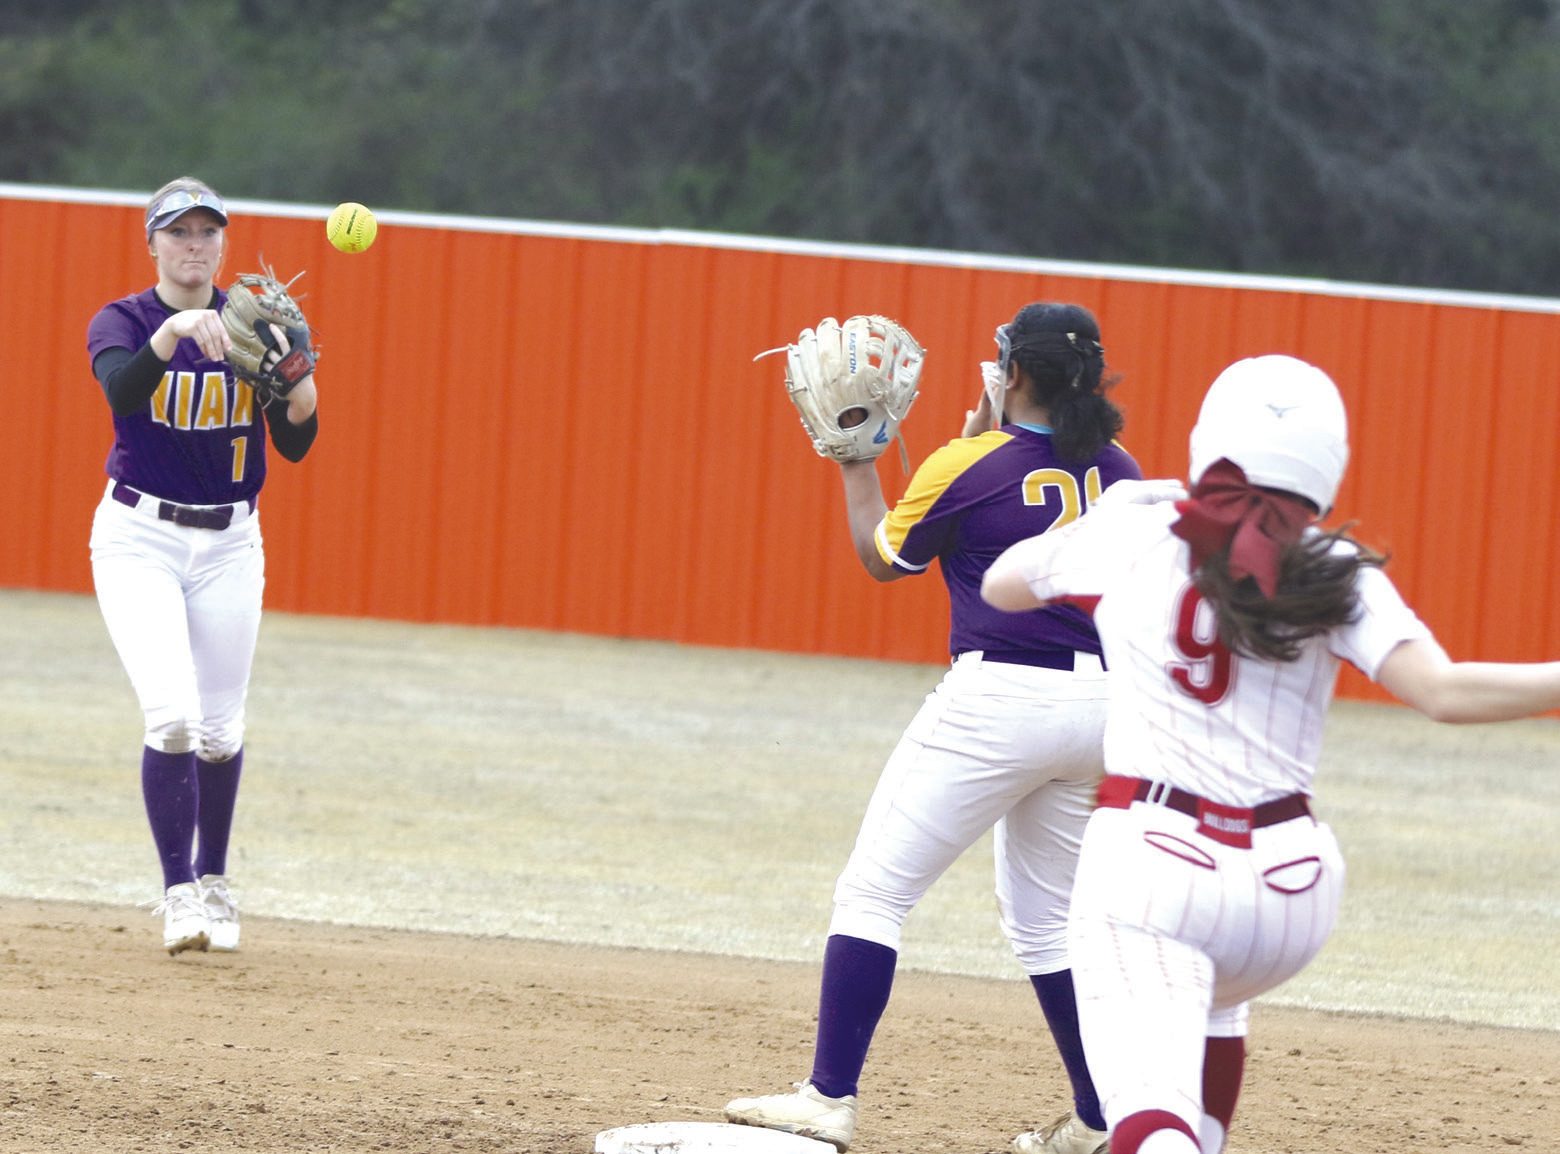 Vian shortstop Maisie Wells throws to second baseman LaKaila Drew to force out Muldrow baserunner Ashley Price during the Lady Wolverines’ Webbers Falls/Sallisaw Slowpitch Tournament opener Thursday at Sallisaw. The Lady Wolverines lost 11-2 to the eventual champion Lady Bulldogs in the contest. LEA LESSLEY •TIMES